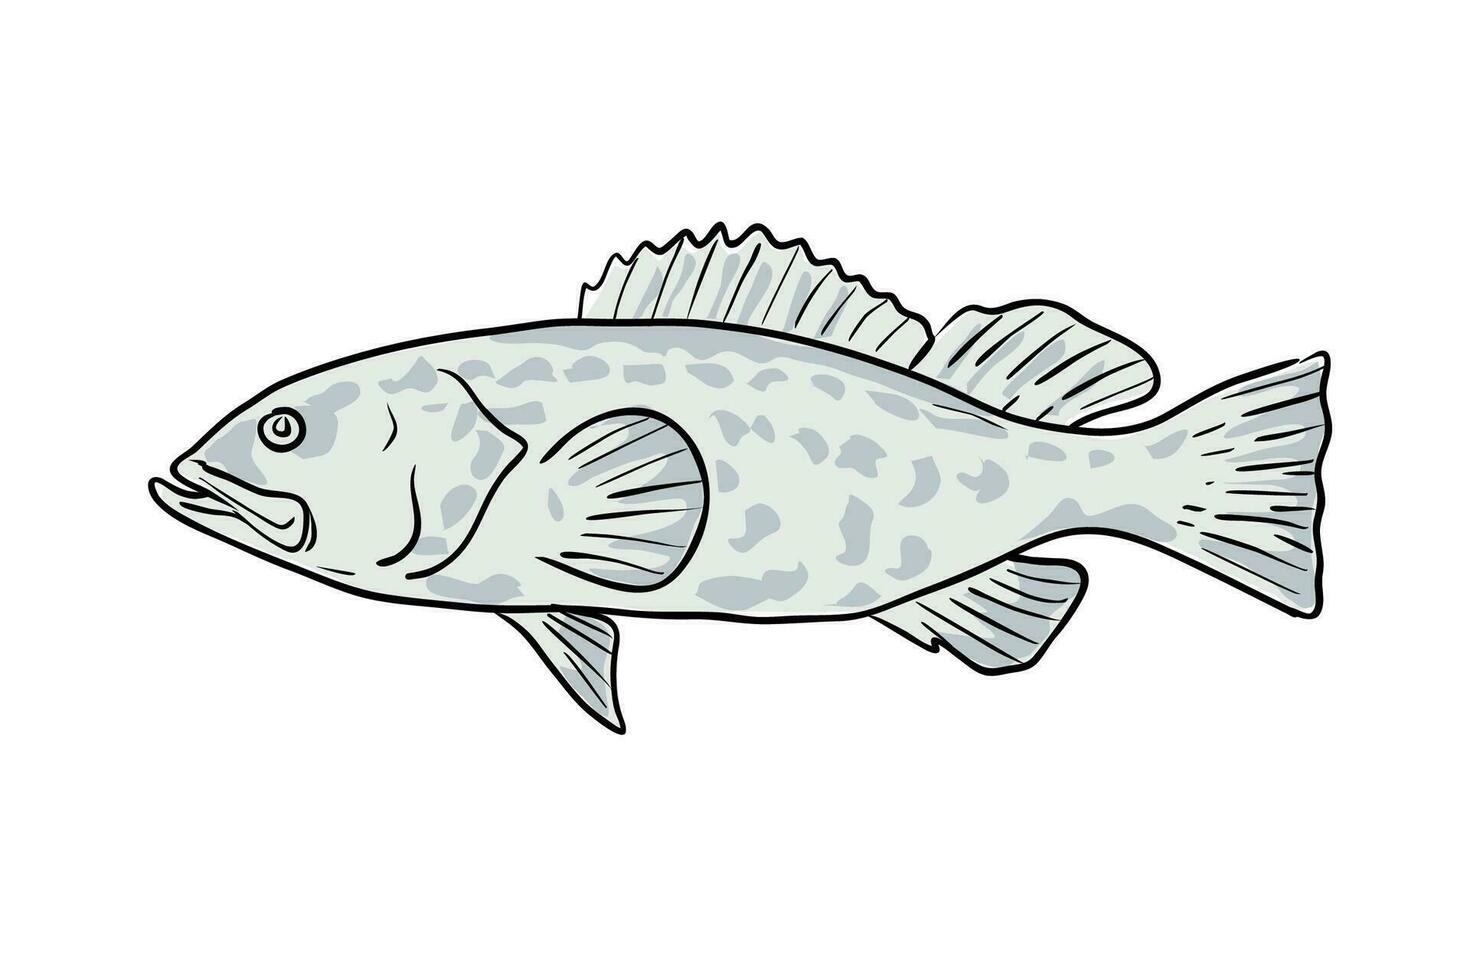 Black Grouper Fish Gulf of Mexico Cartoon Drawing vector